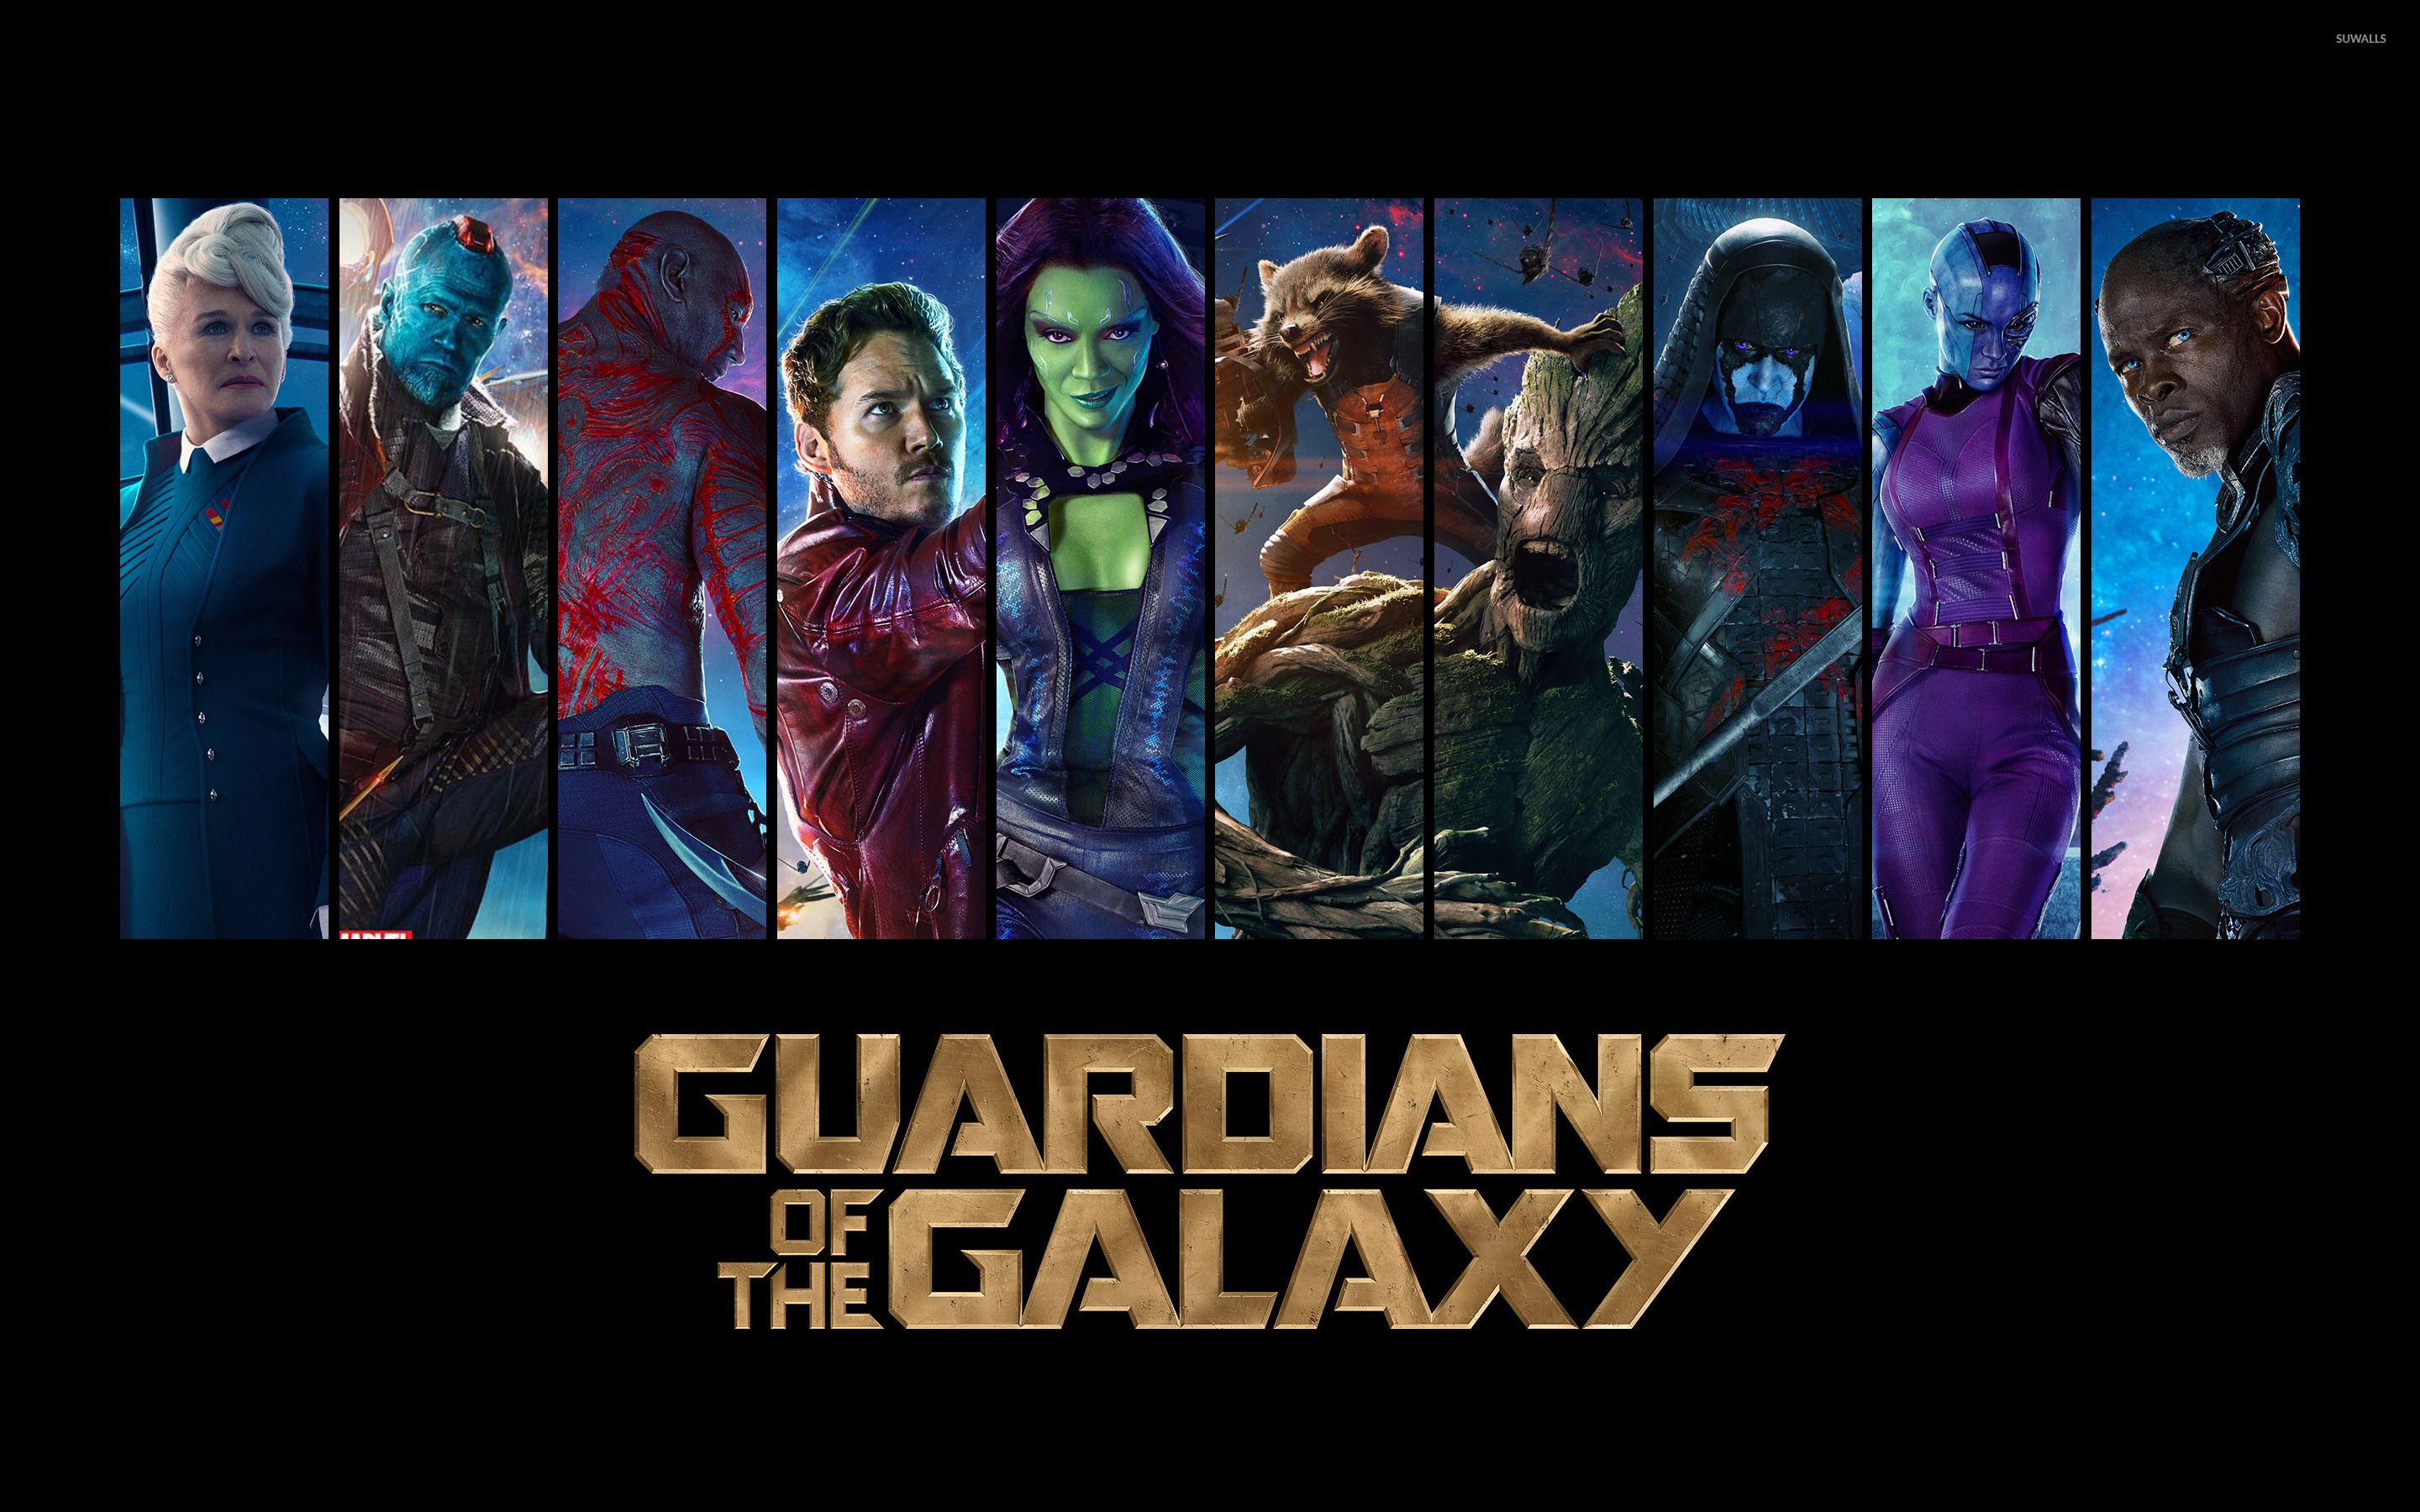 Free download Guardians of the Galaxy wallpaper Movie wallpaper 32272 [2880x1800] for your Desktop, Mobile & Tablet. Explore Guardians Of The Galaxy Wallpaper. Guardians Of The Galaxy Wallpaper, Guardians